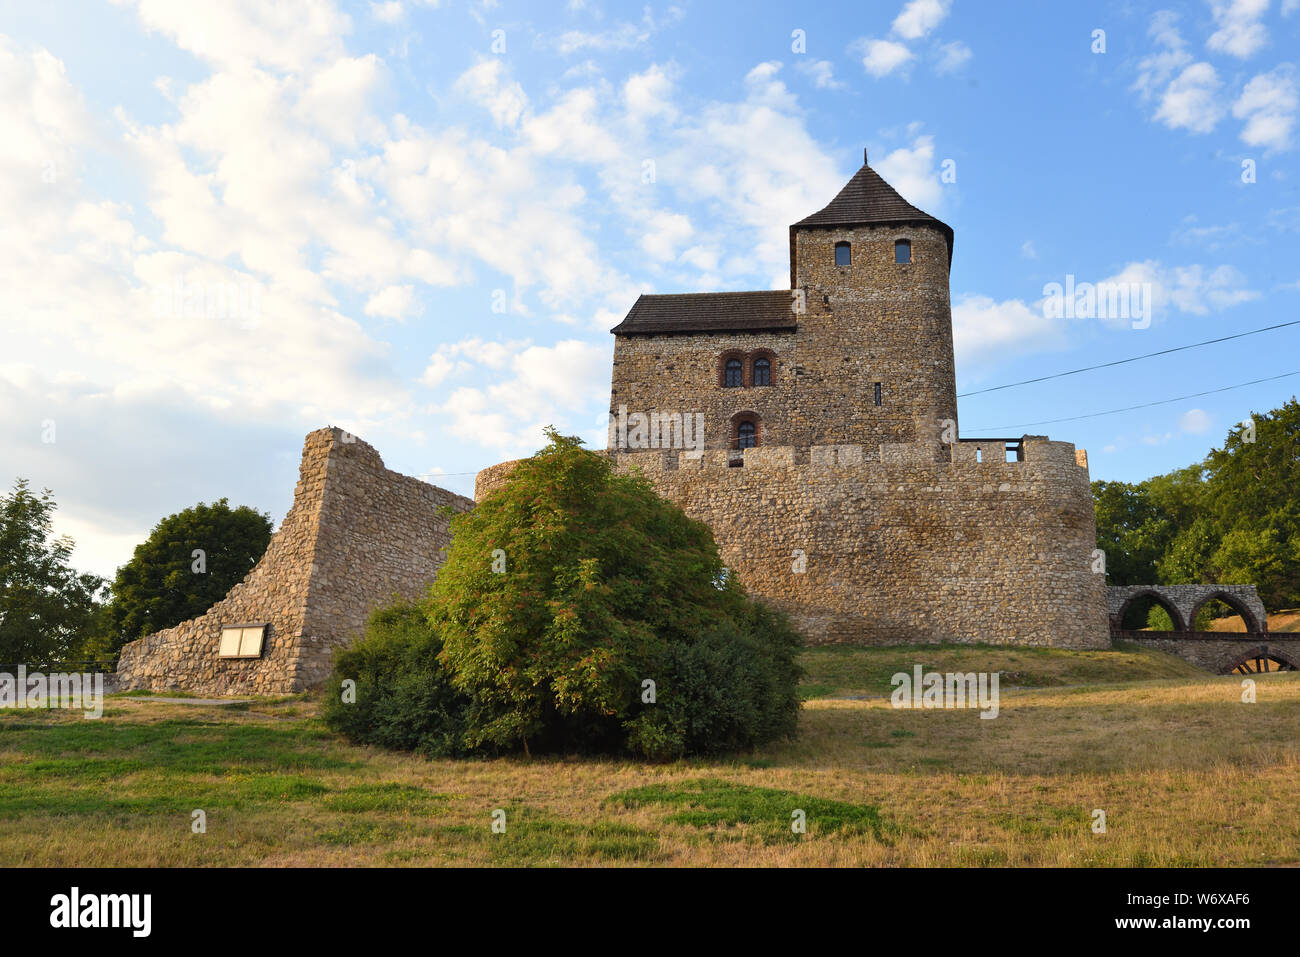 Medieval Bedzin Castle in southern Poland. The stone fortification dates to the 14th century. Europe Stock Photo